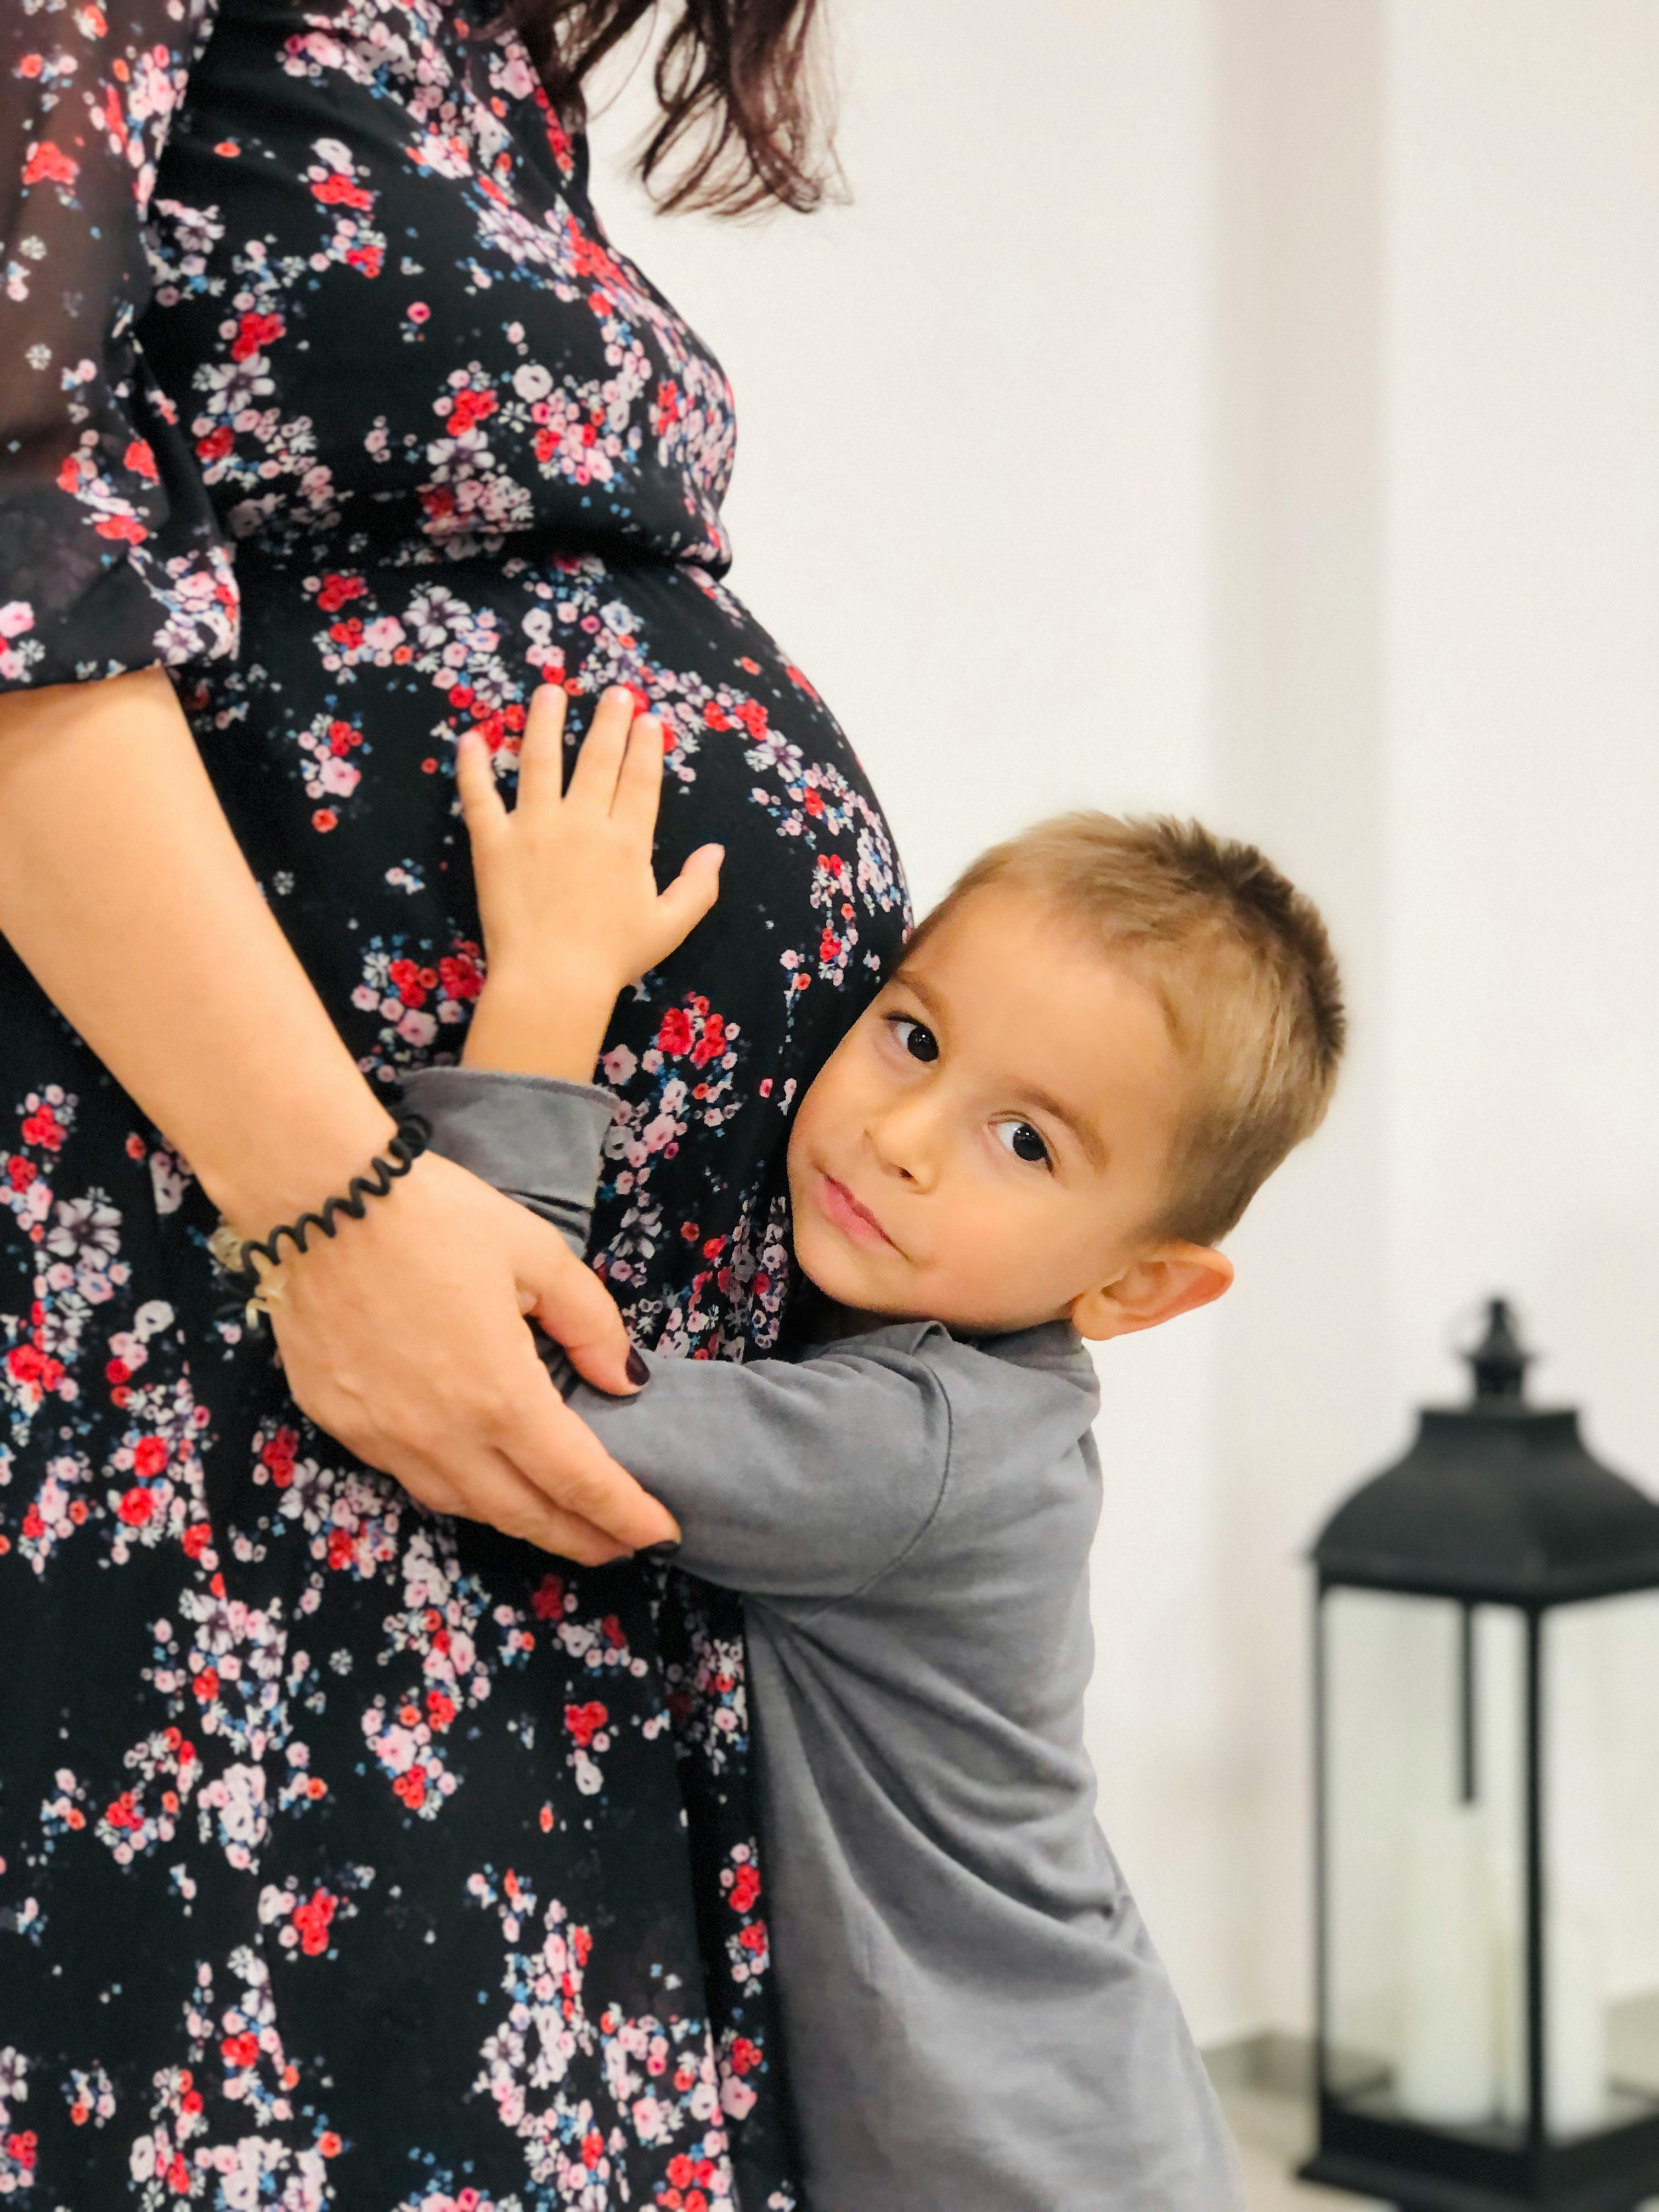 A child holding his pregnant mom | Source: Pexels